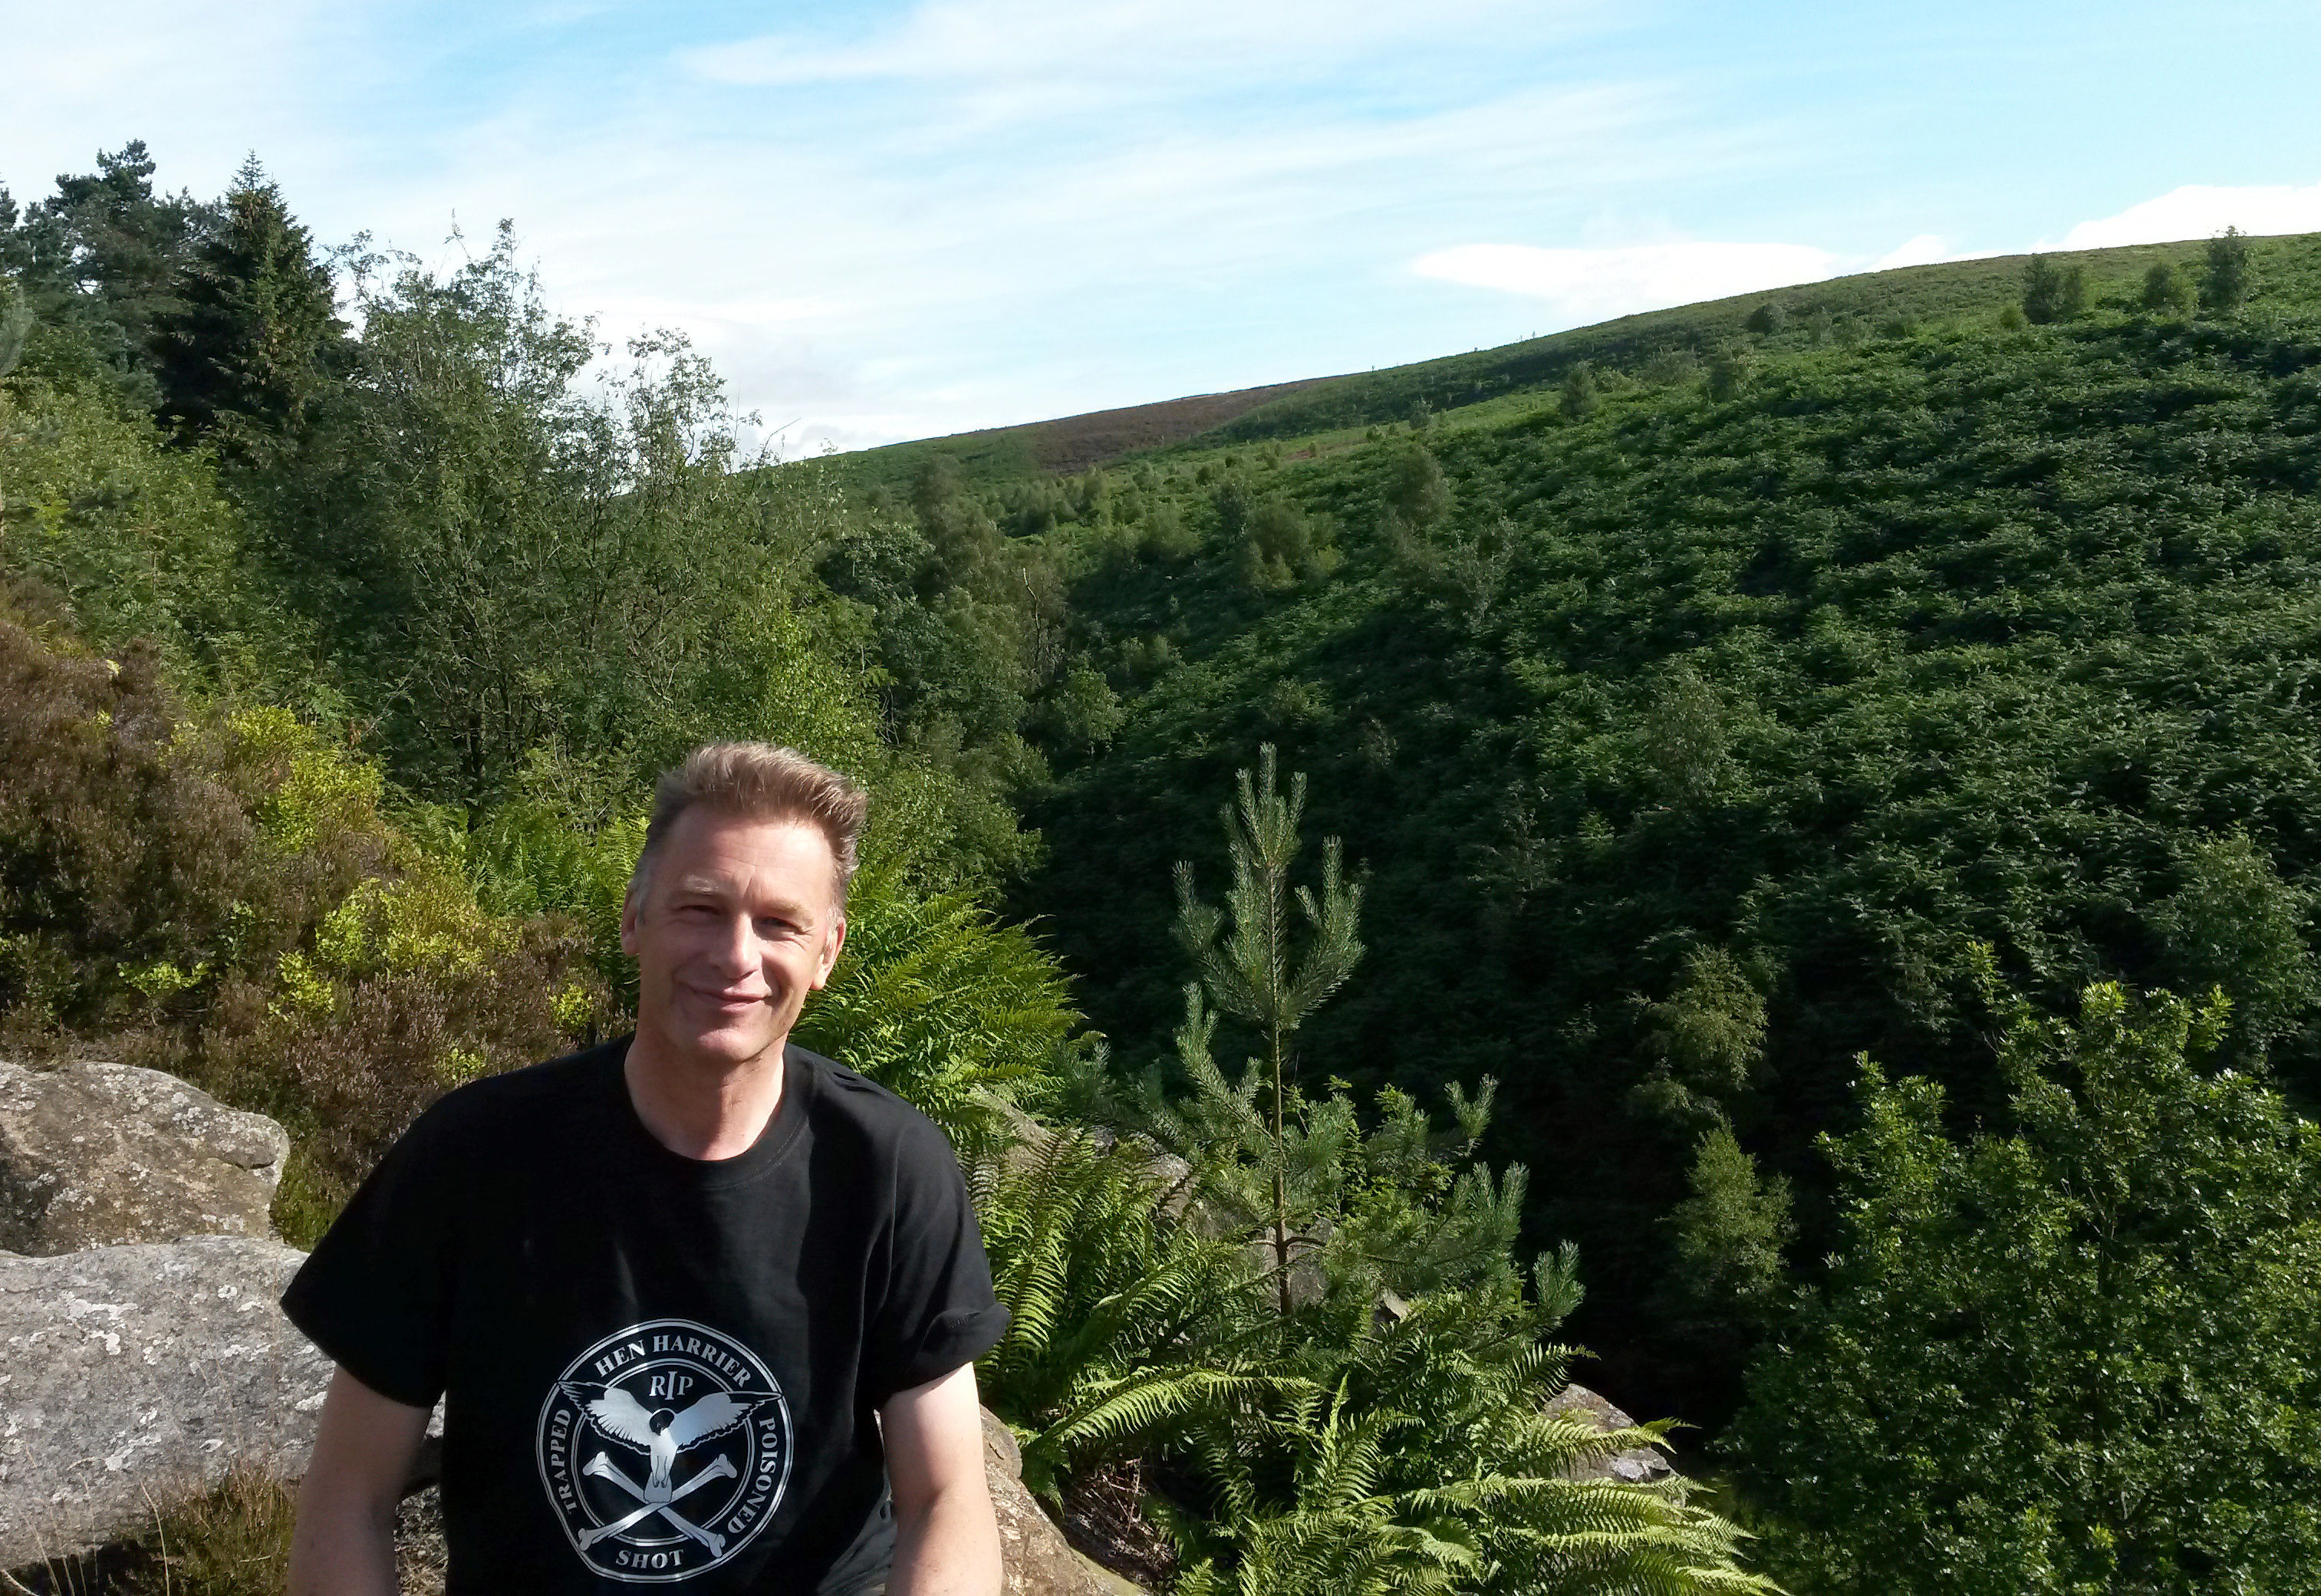 Chris Packham joined the Hen Harrier Day protest in the Peak District in 2015.